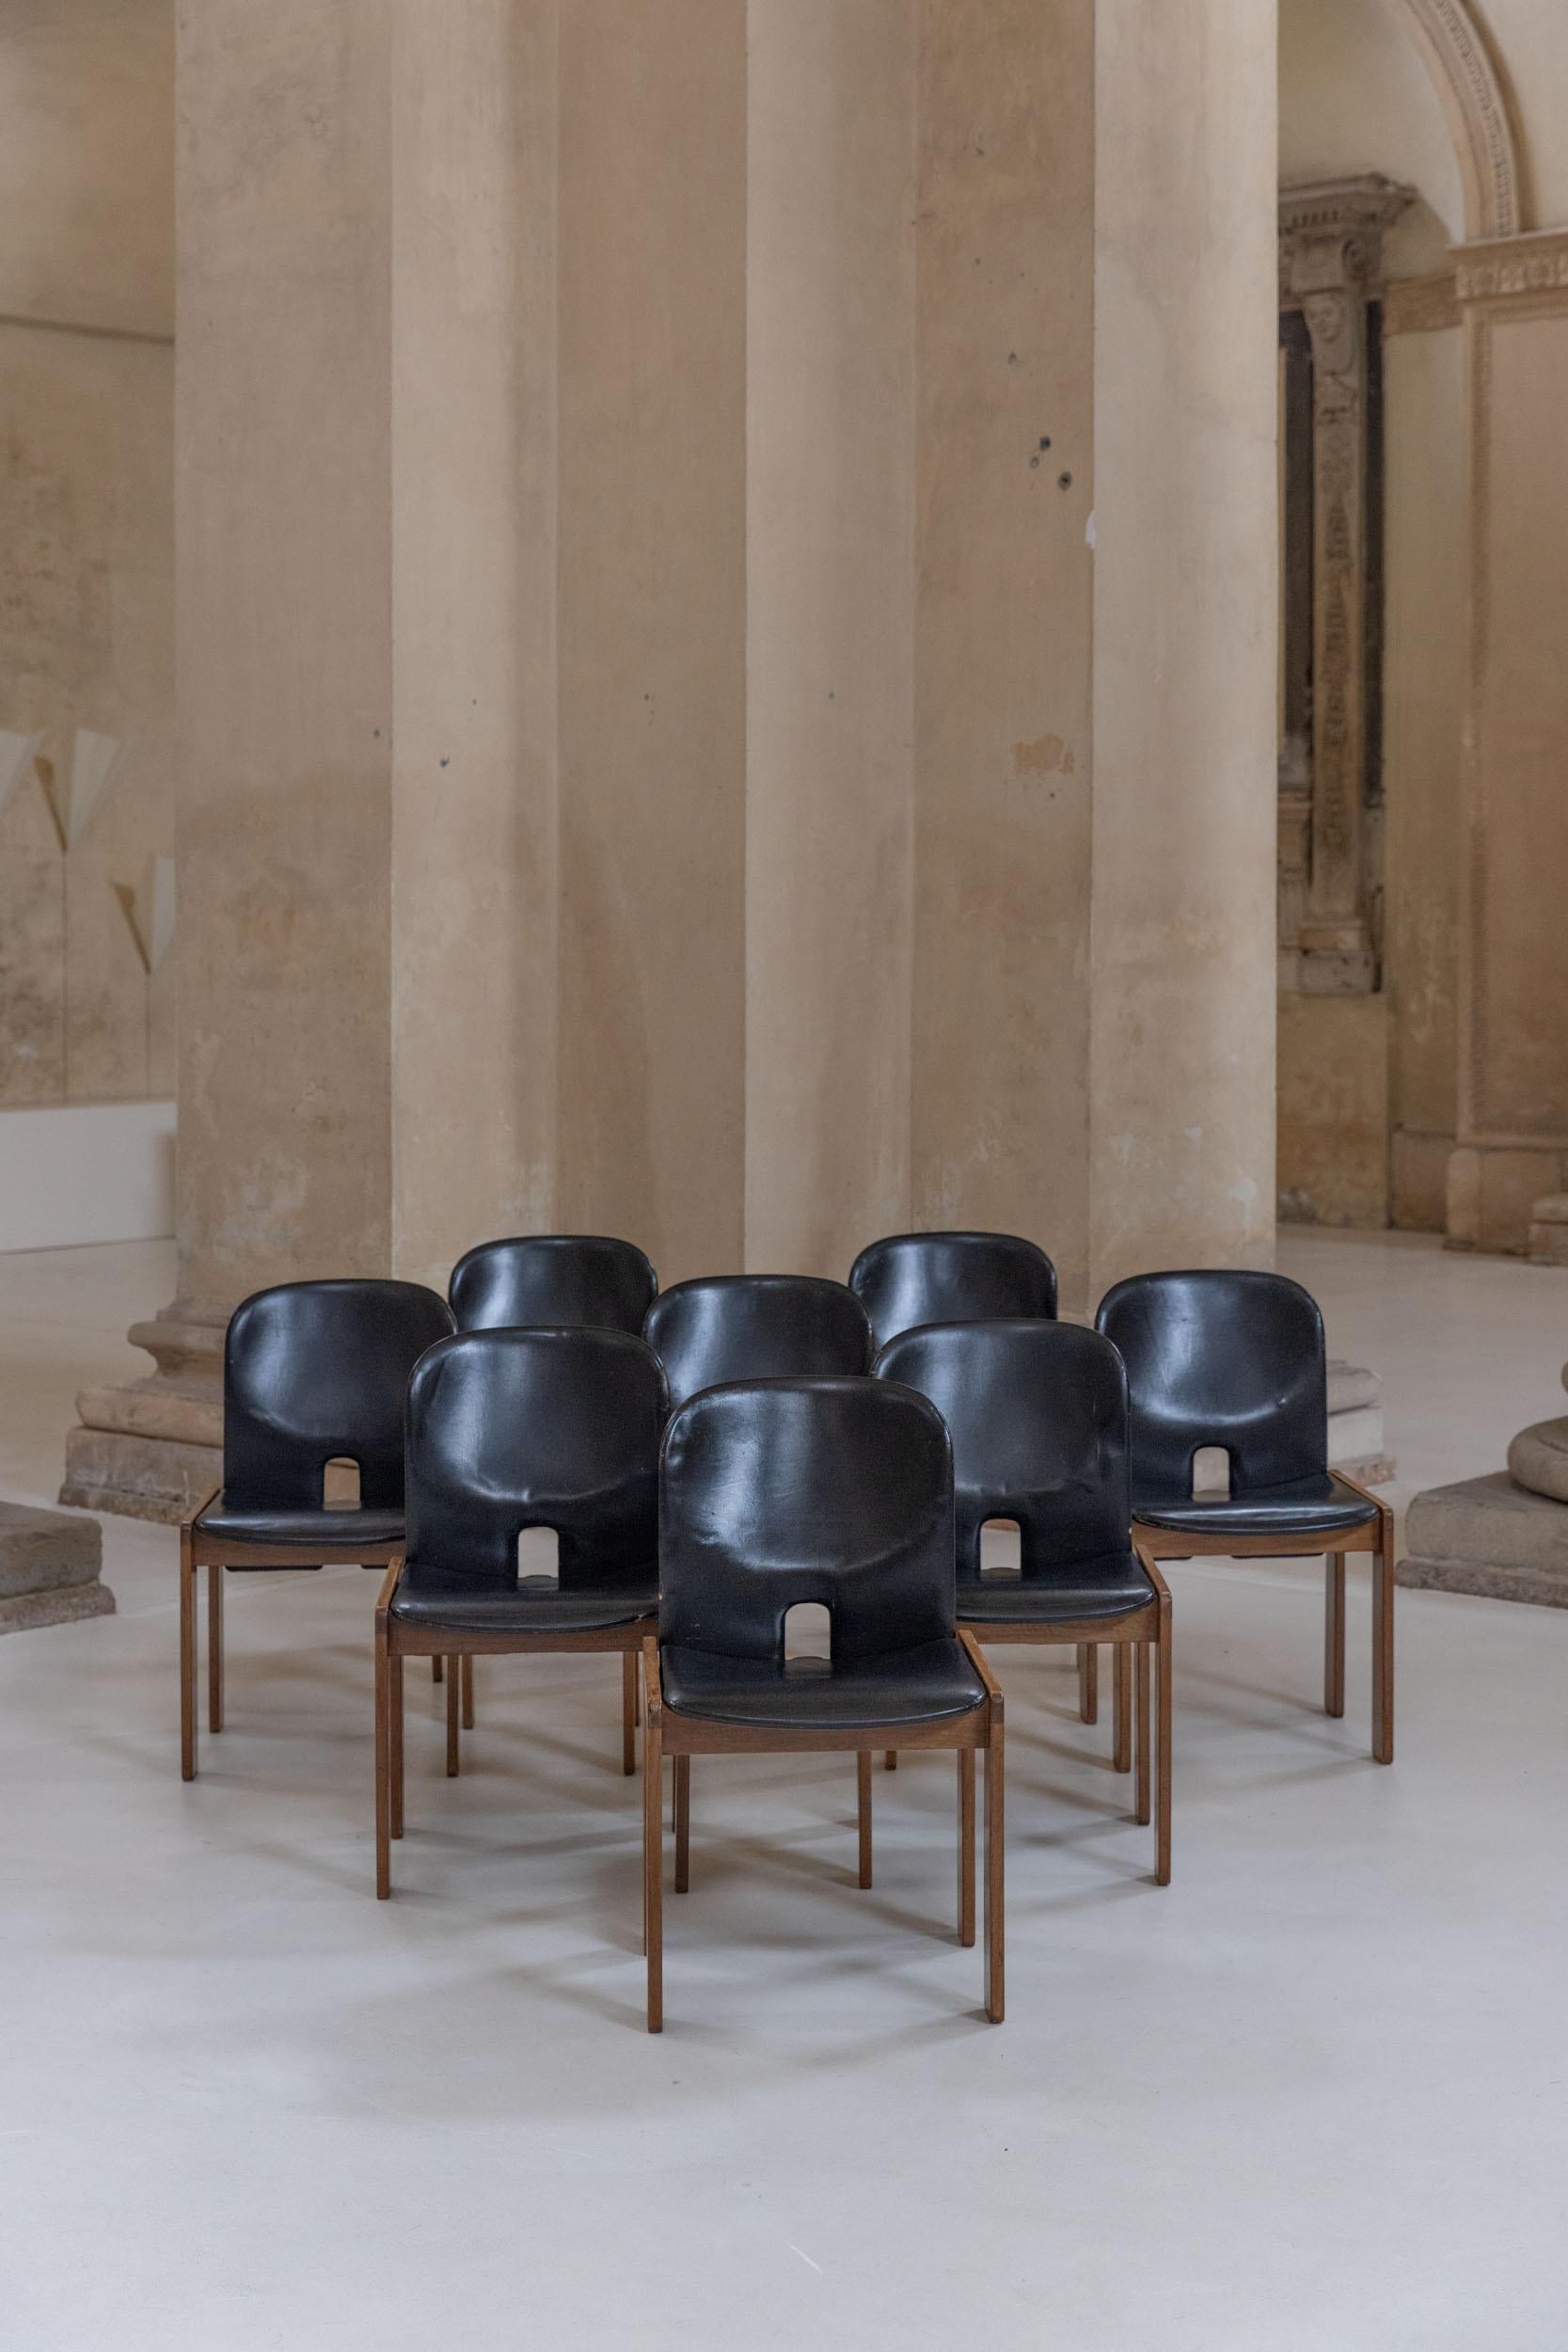 Iconic set of eight leather and wood chairs model 121 by Afra e Tobia Scarpa for Cassina.
Italy, 1965.
Very comfortable seats.
Literature.: Giuliana Gramigna, “Repertorio del Design Italiano1950‐2000”, Allemandi, 2011, pag. 117 